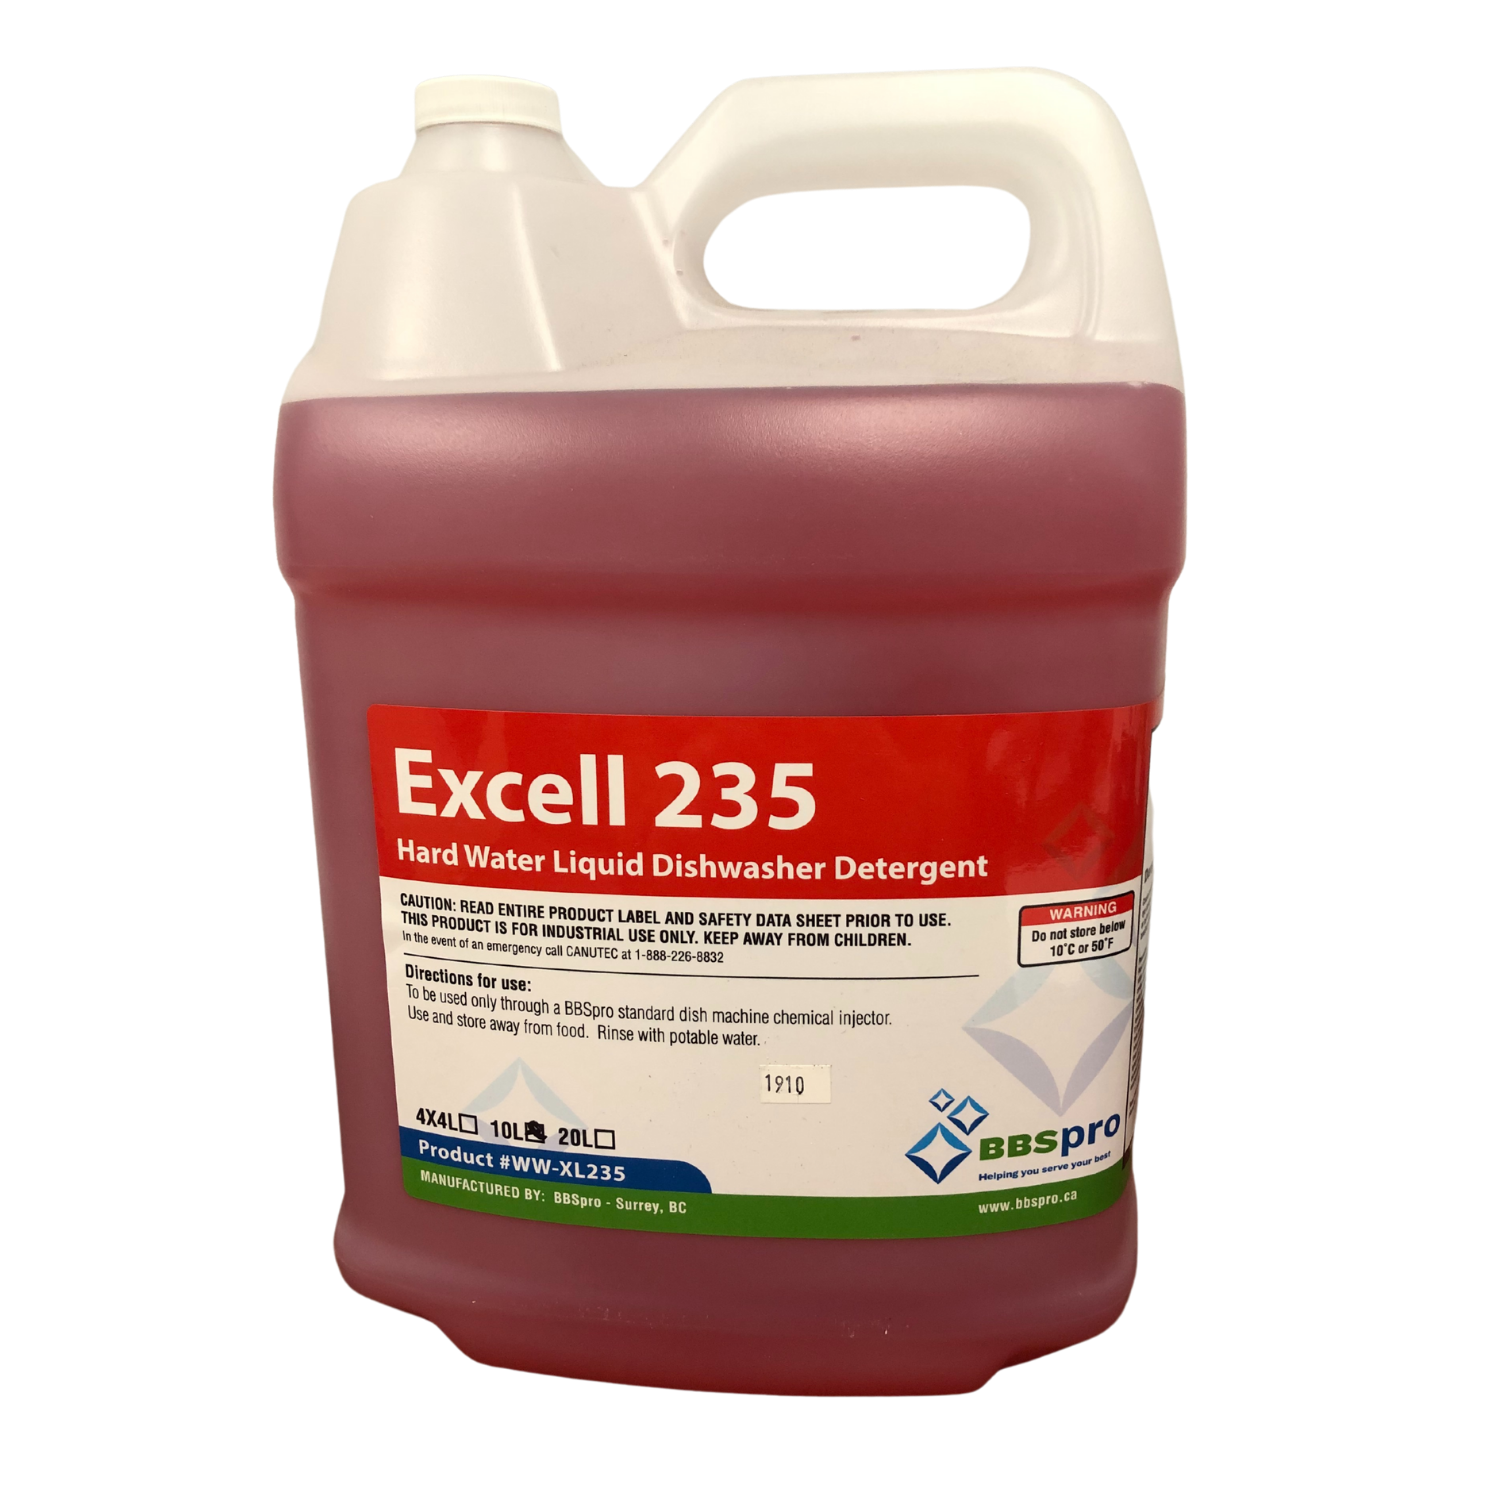 Excell 235